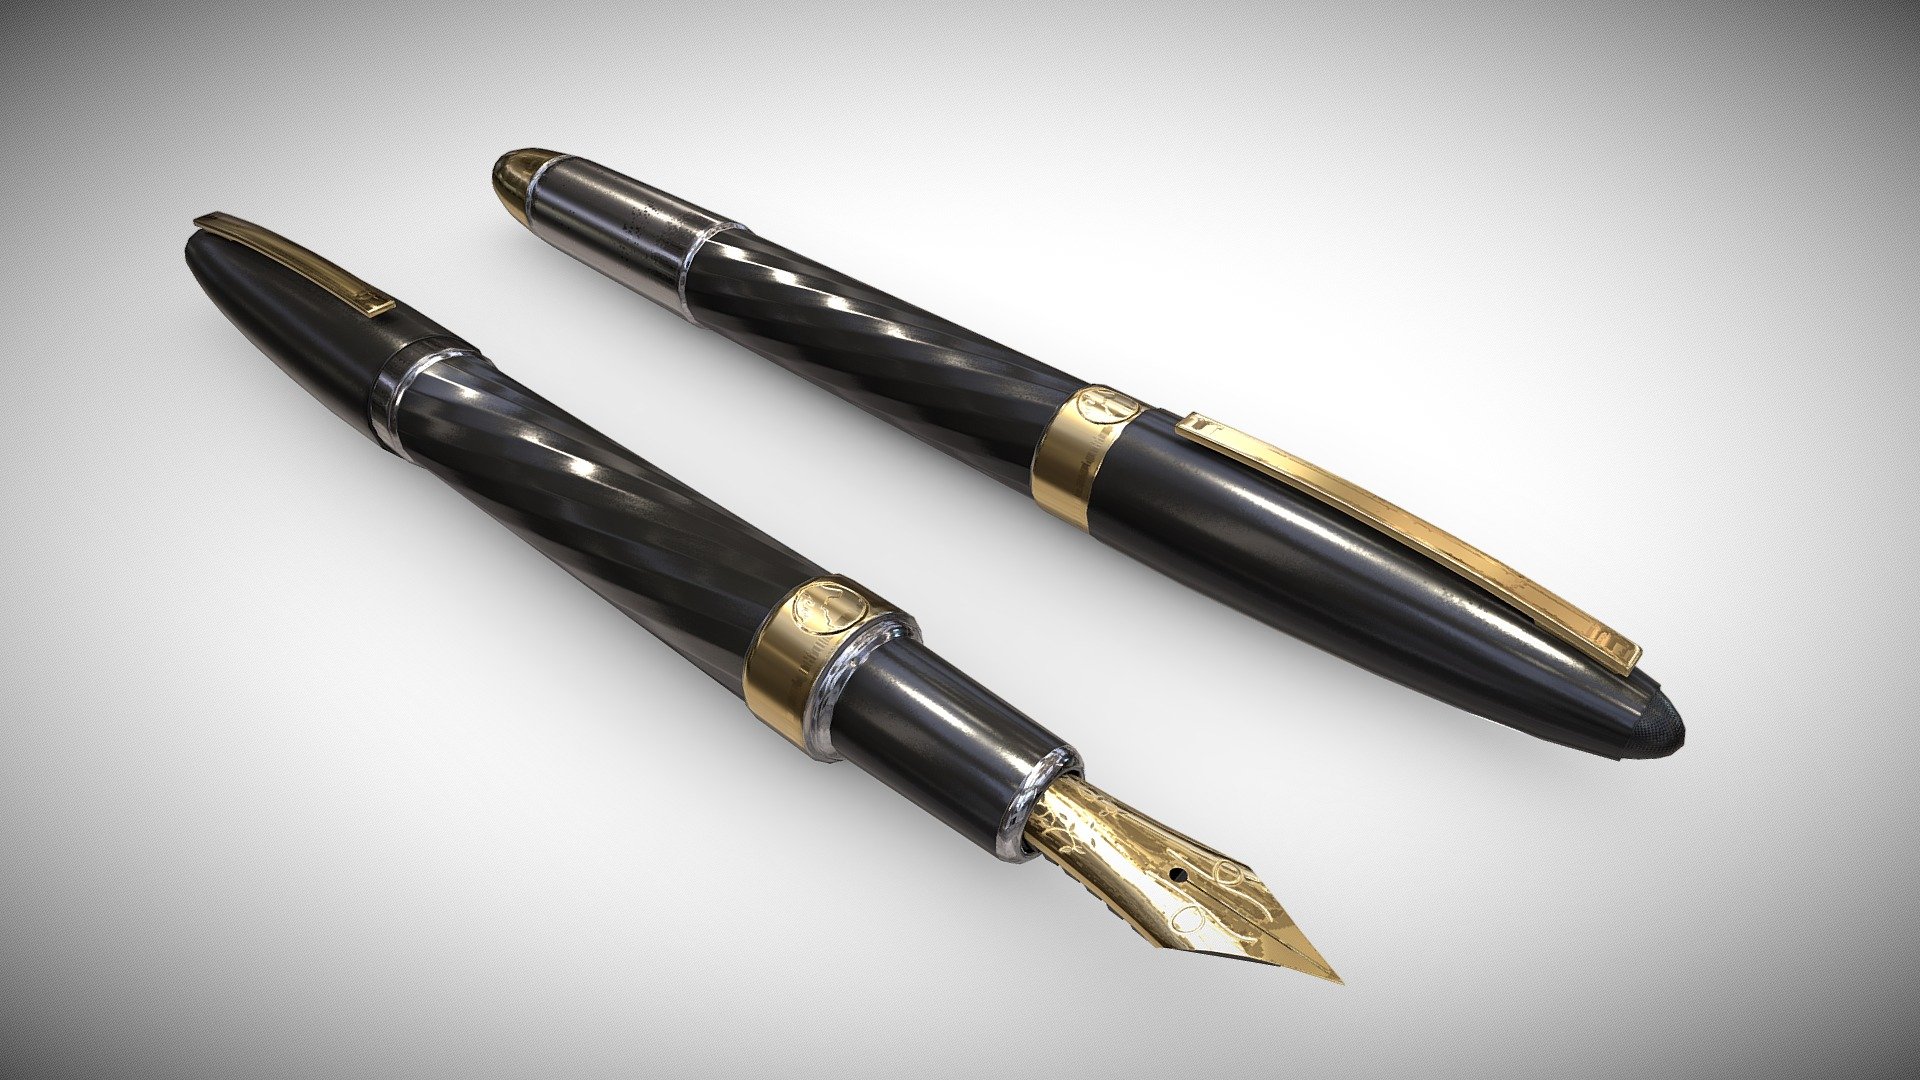 ProfessionalAssets Calligraphy Pen

PA - Calligraphy Pen - Buy Royalty Free 3D model by ProfessionalAssets (@ProfessionalAsstes) 3d model